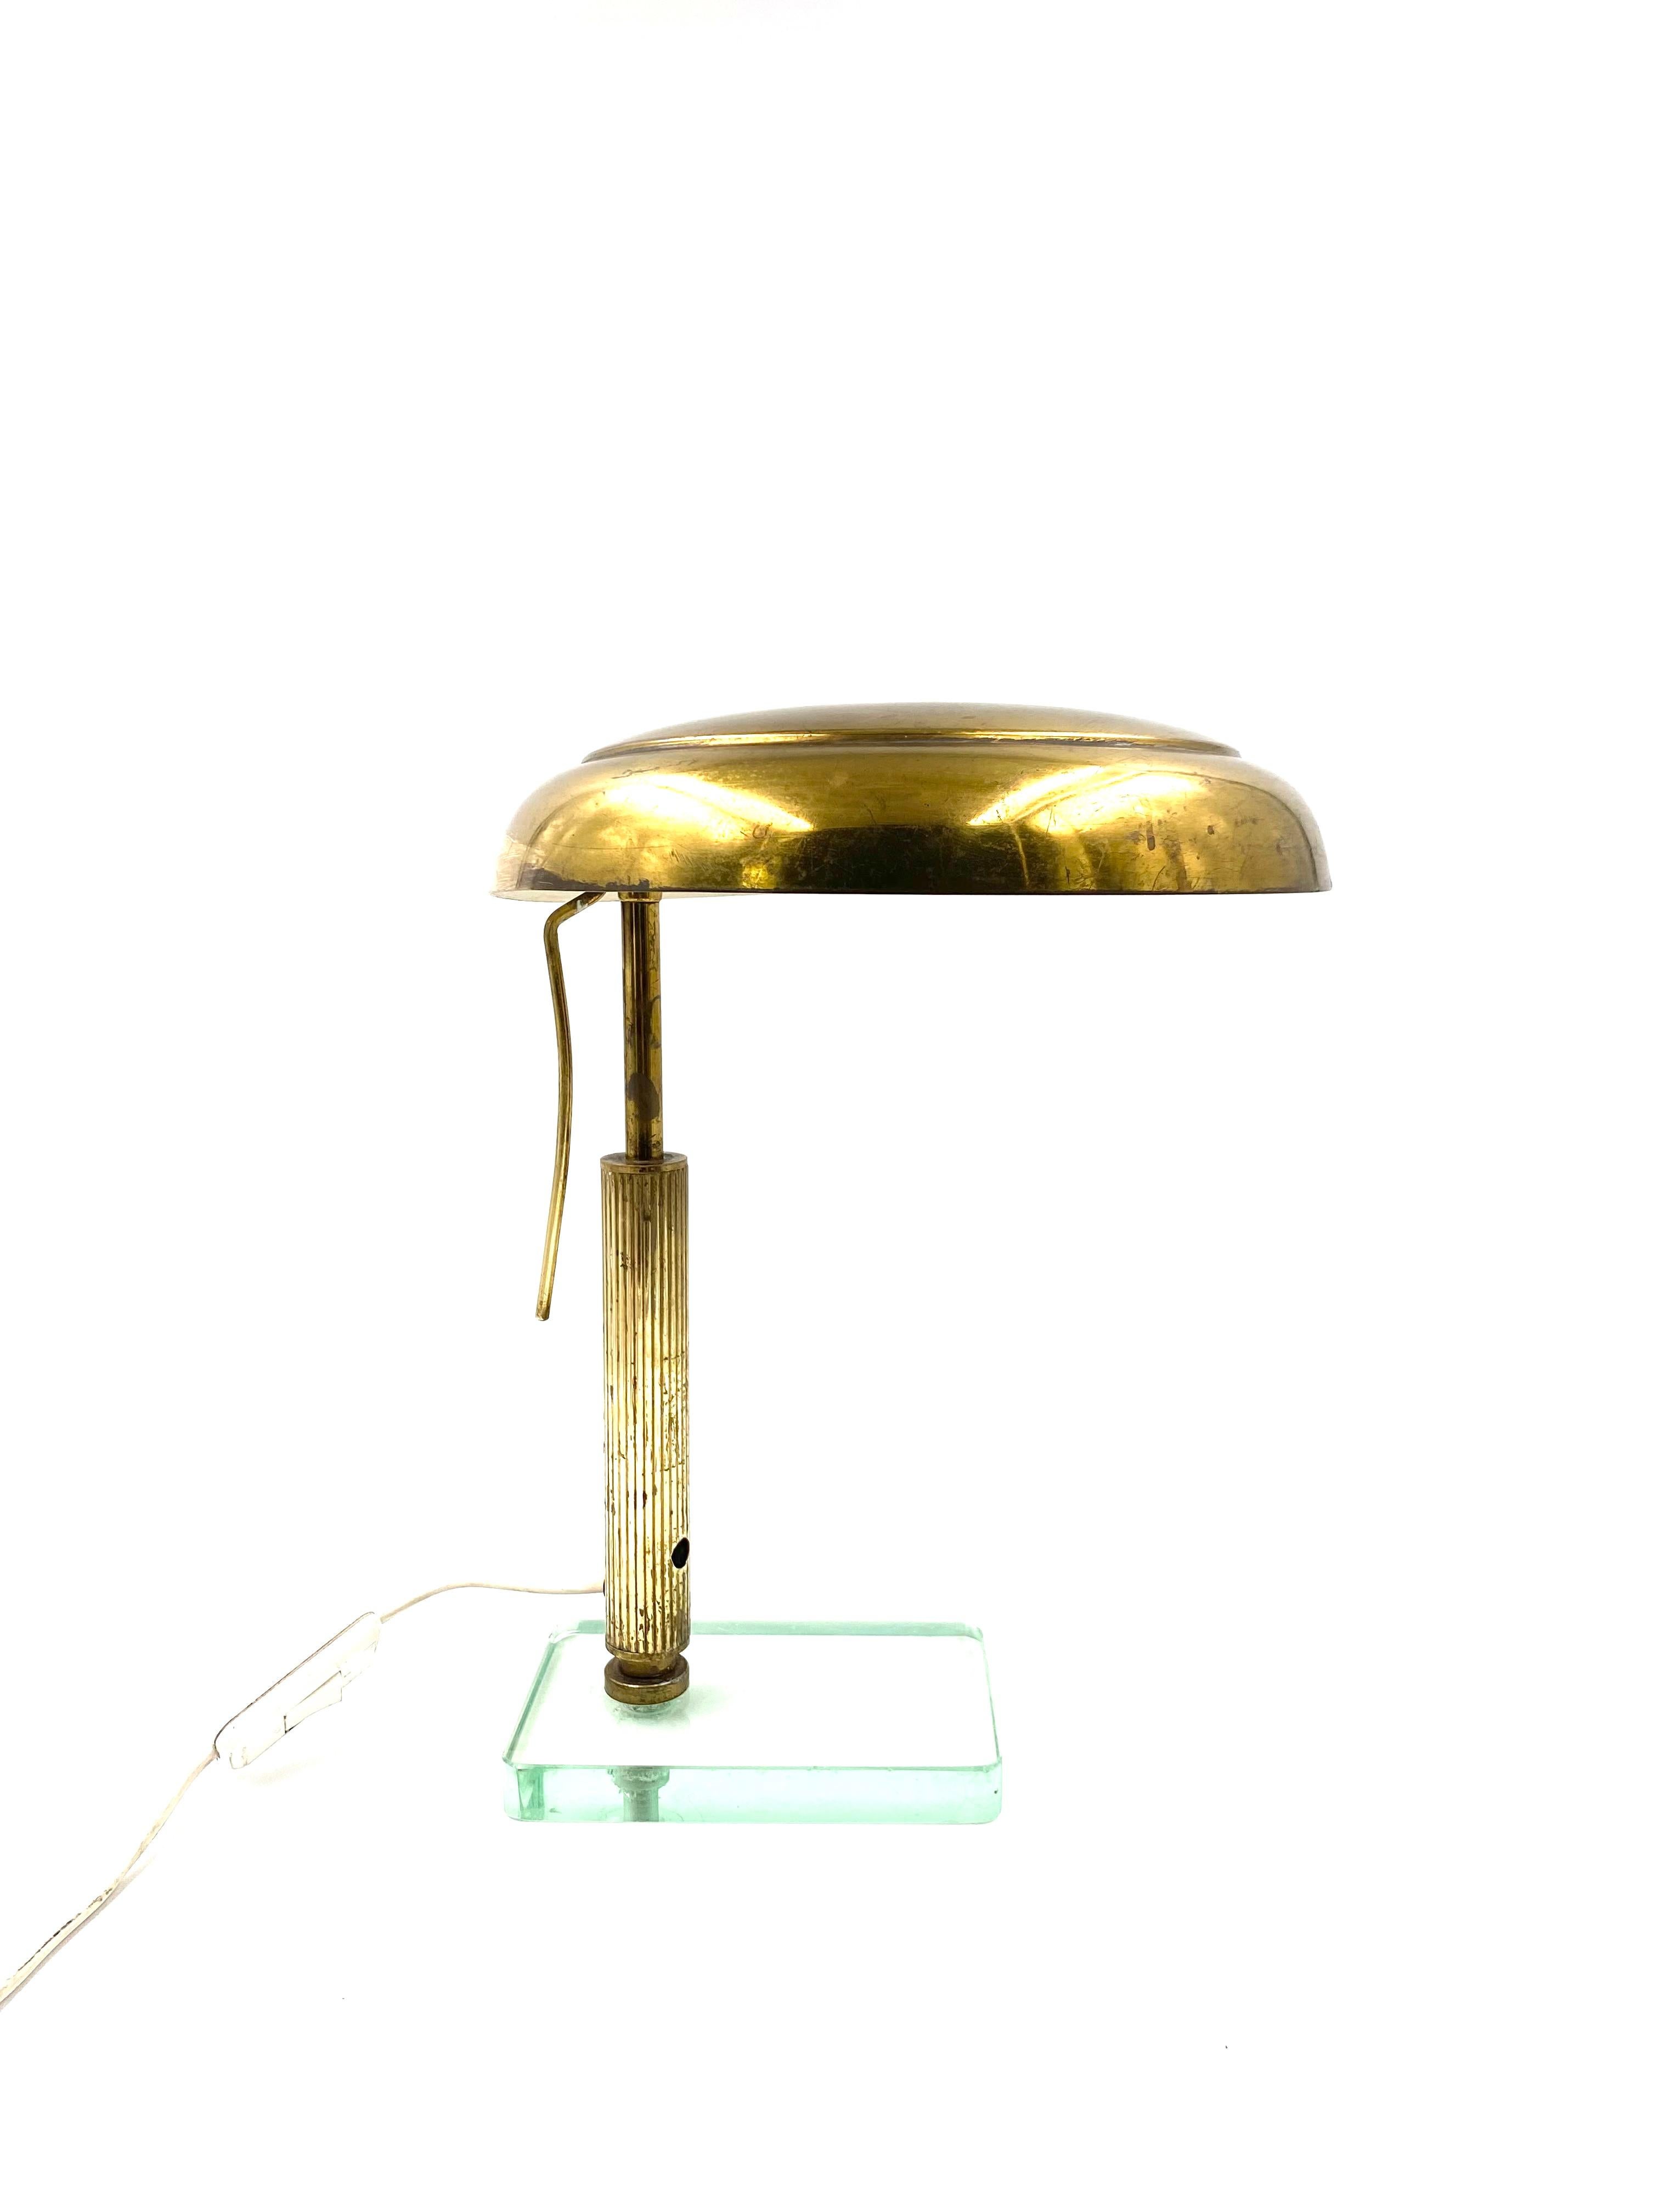 Pietro Chiesa attr., brass table / desk lamp

Fontana Arte, circa 1940

brass and glass base

Double light bulbs.

Measures: 36H x 29 cm

Conditions: good consistent with age and use. Original condition, unrestored, Brass in patina, slight